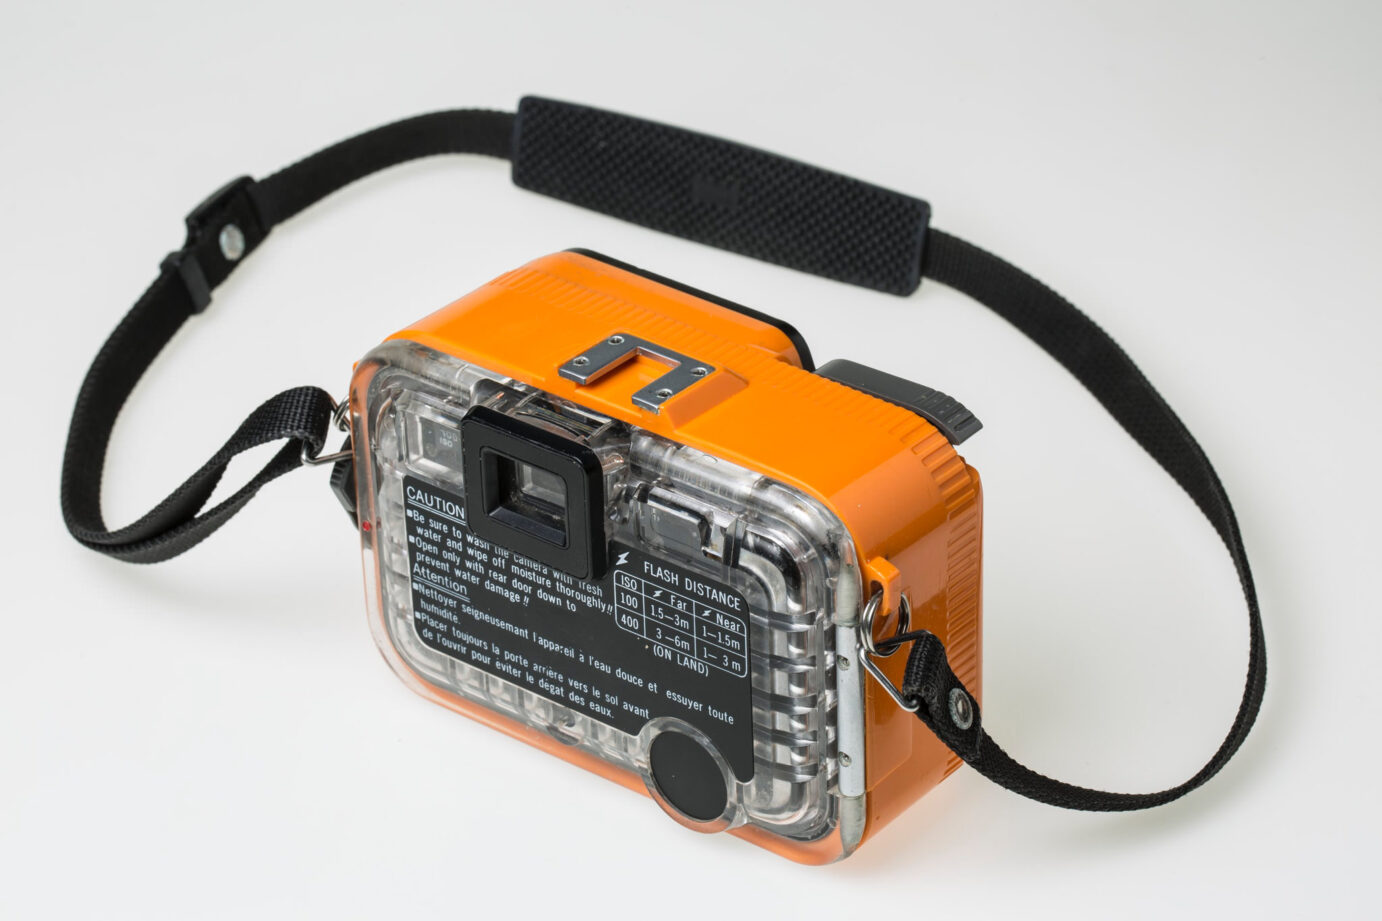 Hanimex Amphibian - What film and battery do you need?